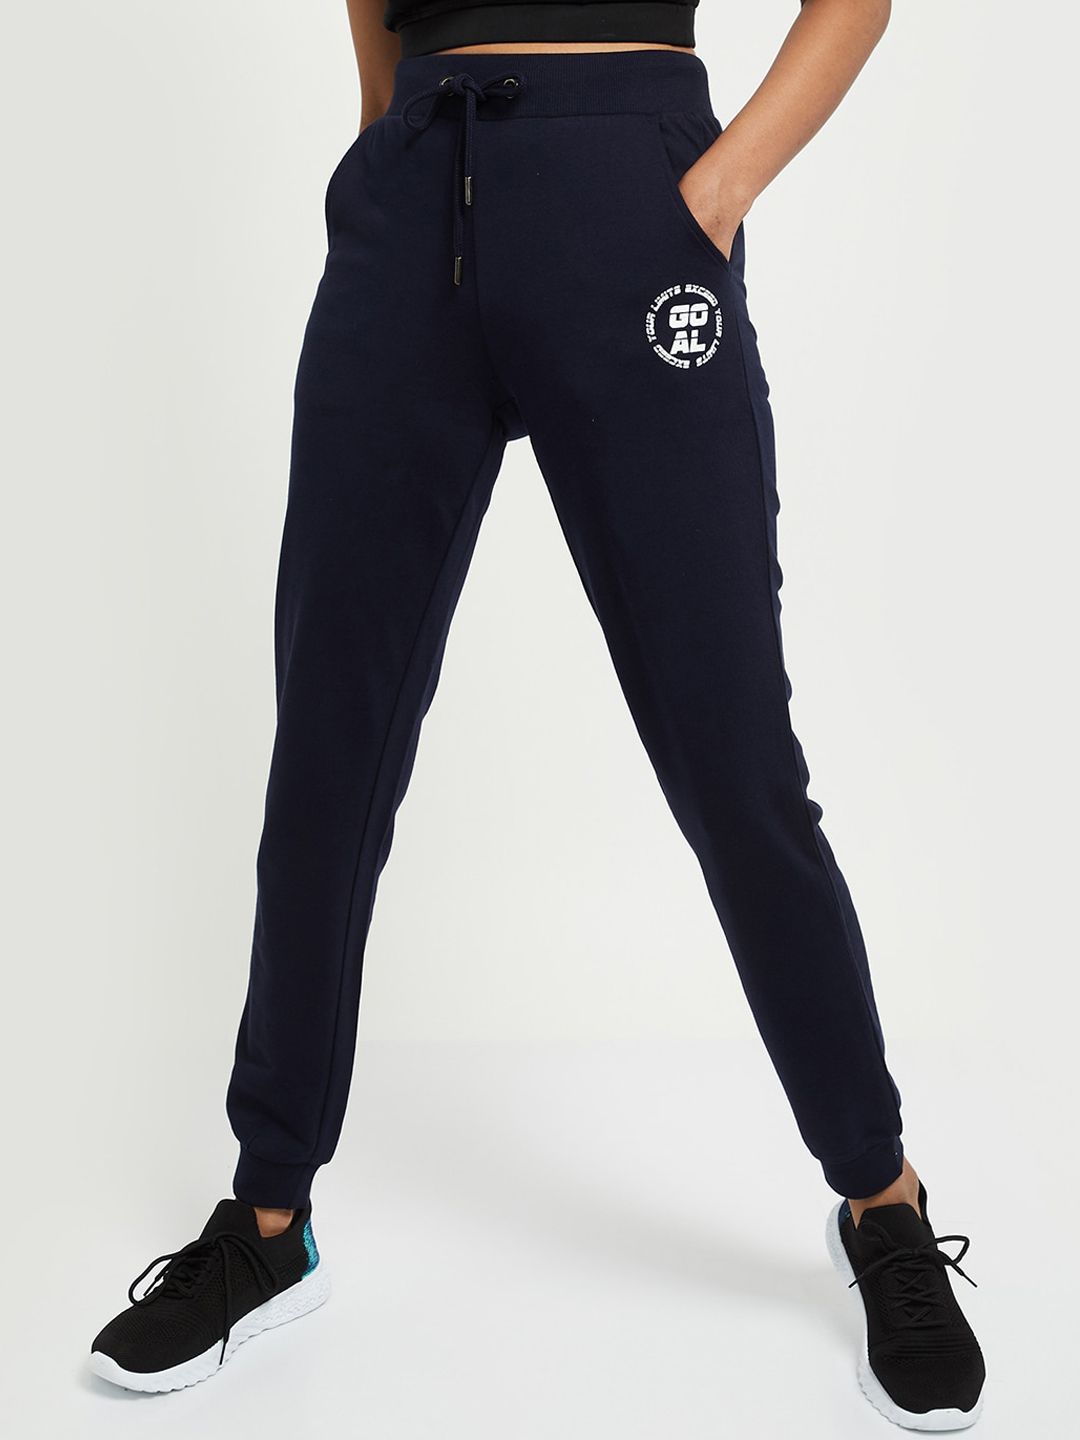 max Women Navy Blue Solid Regular Fit Joggers Price in India